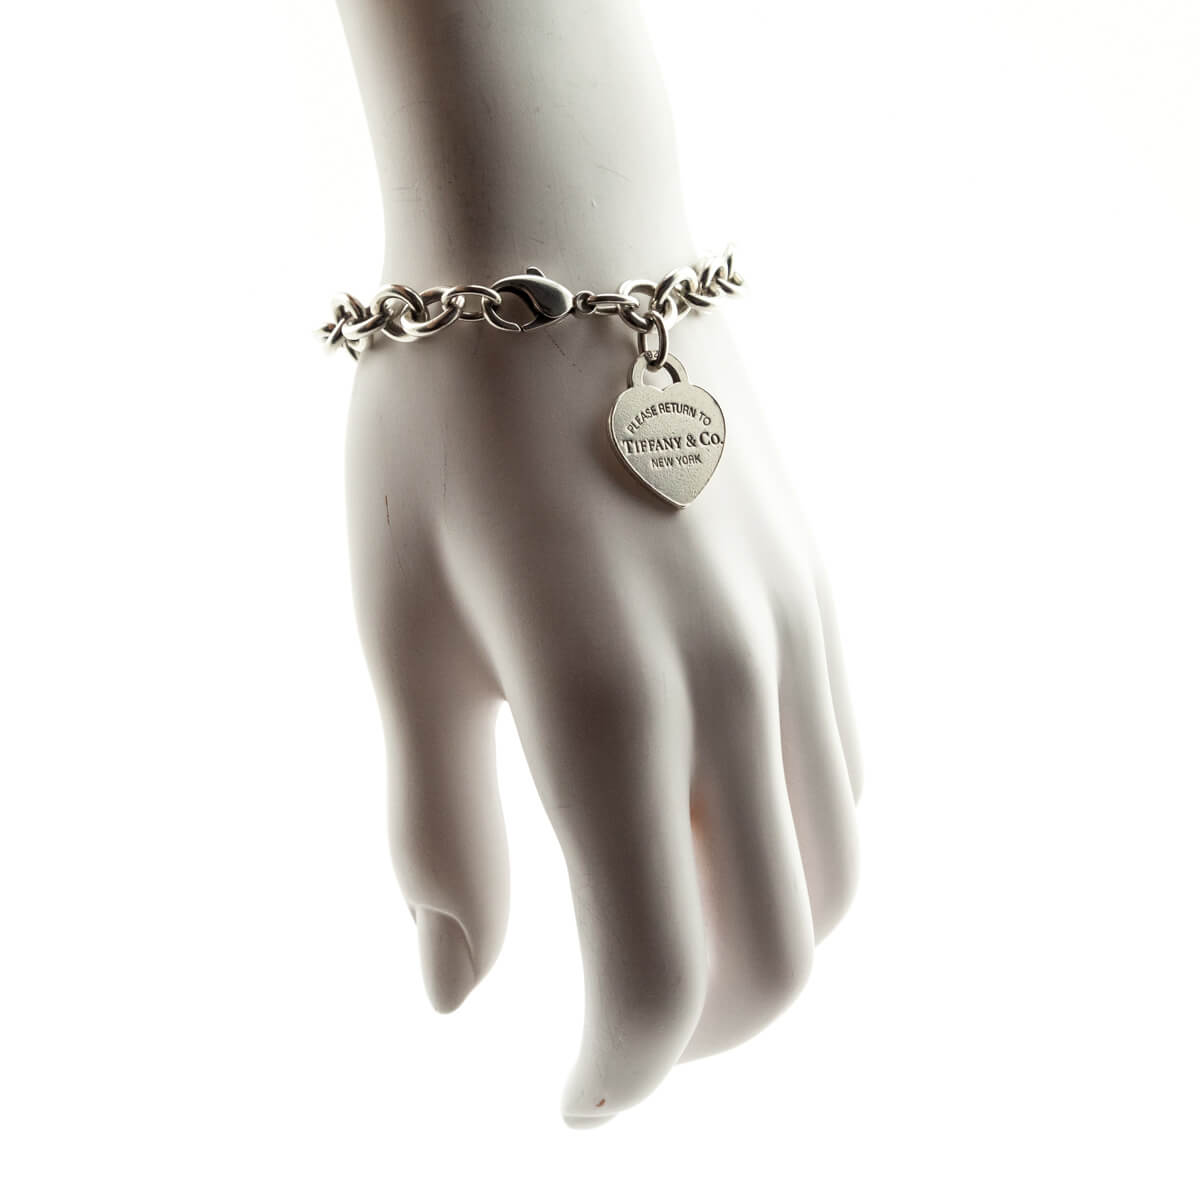 Authentic Second Hand Tiffany  Co Tiffany 1837 Silver Charm Bracelet  PSS05400364  THE FIFTH COLLECTION